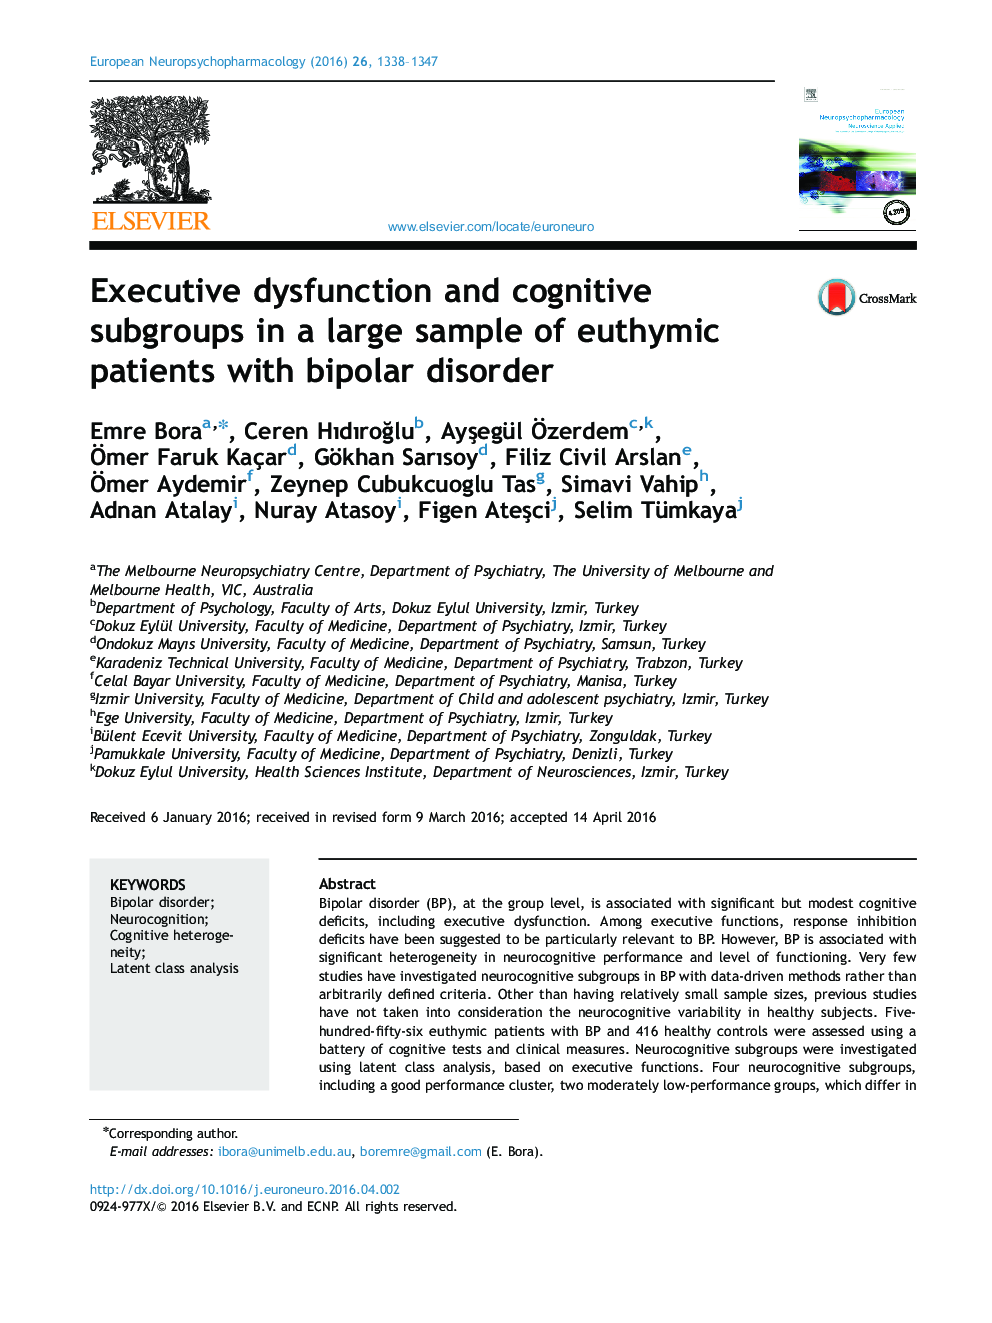 Executive dysfunction and cognitive subgroups in a large sample of euthymic patients with bipolar disorder